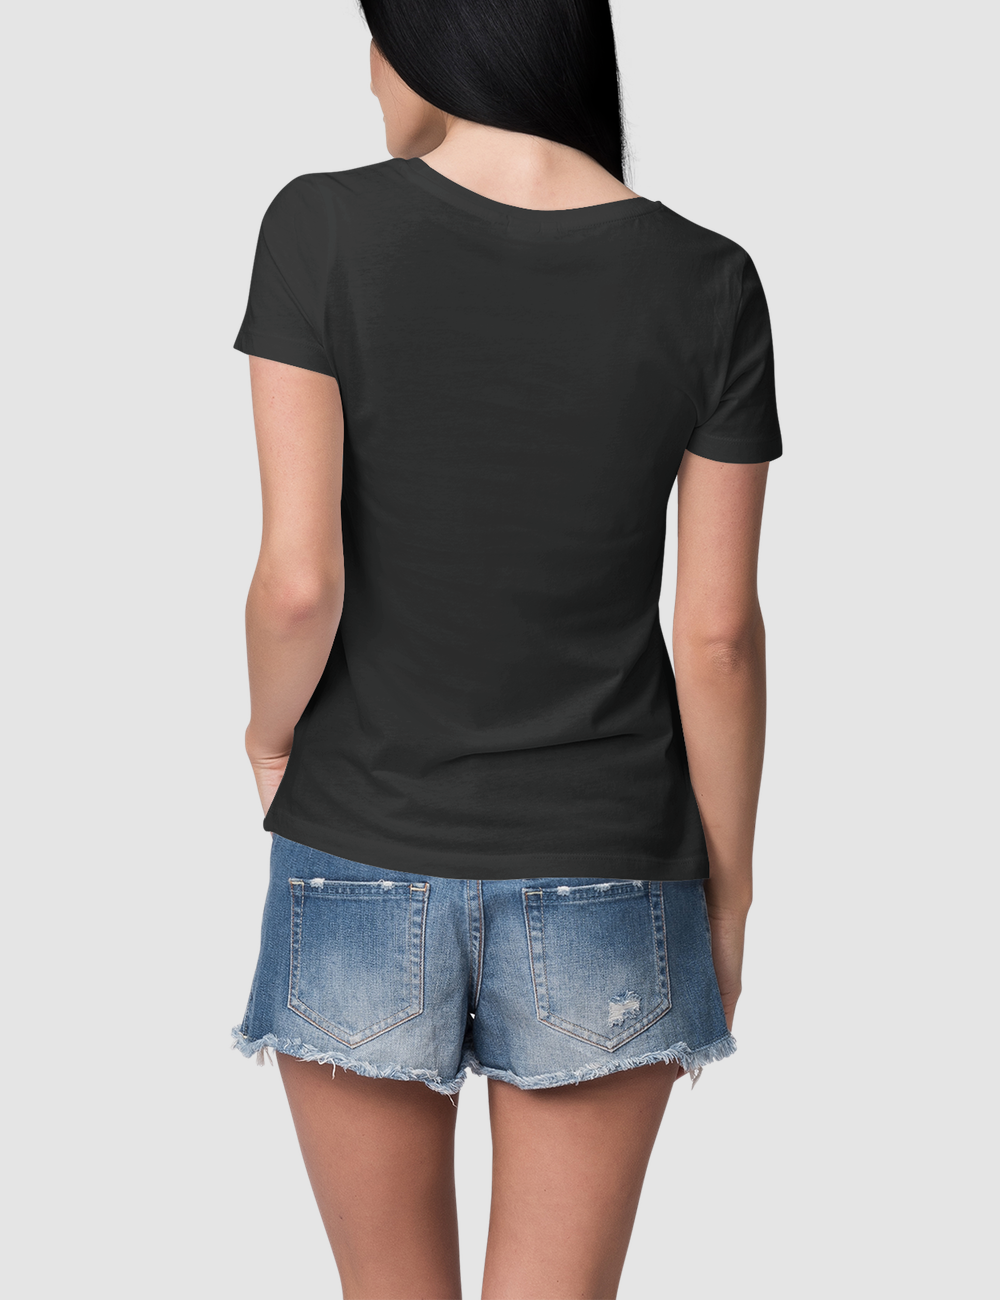 All Black Everything | Women's Fitted T-Shirt OniTakai